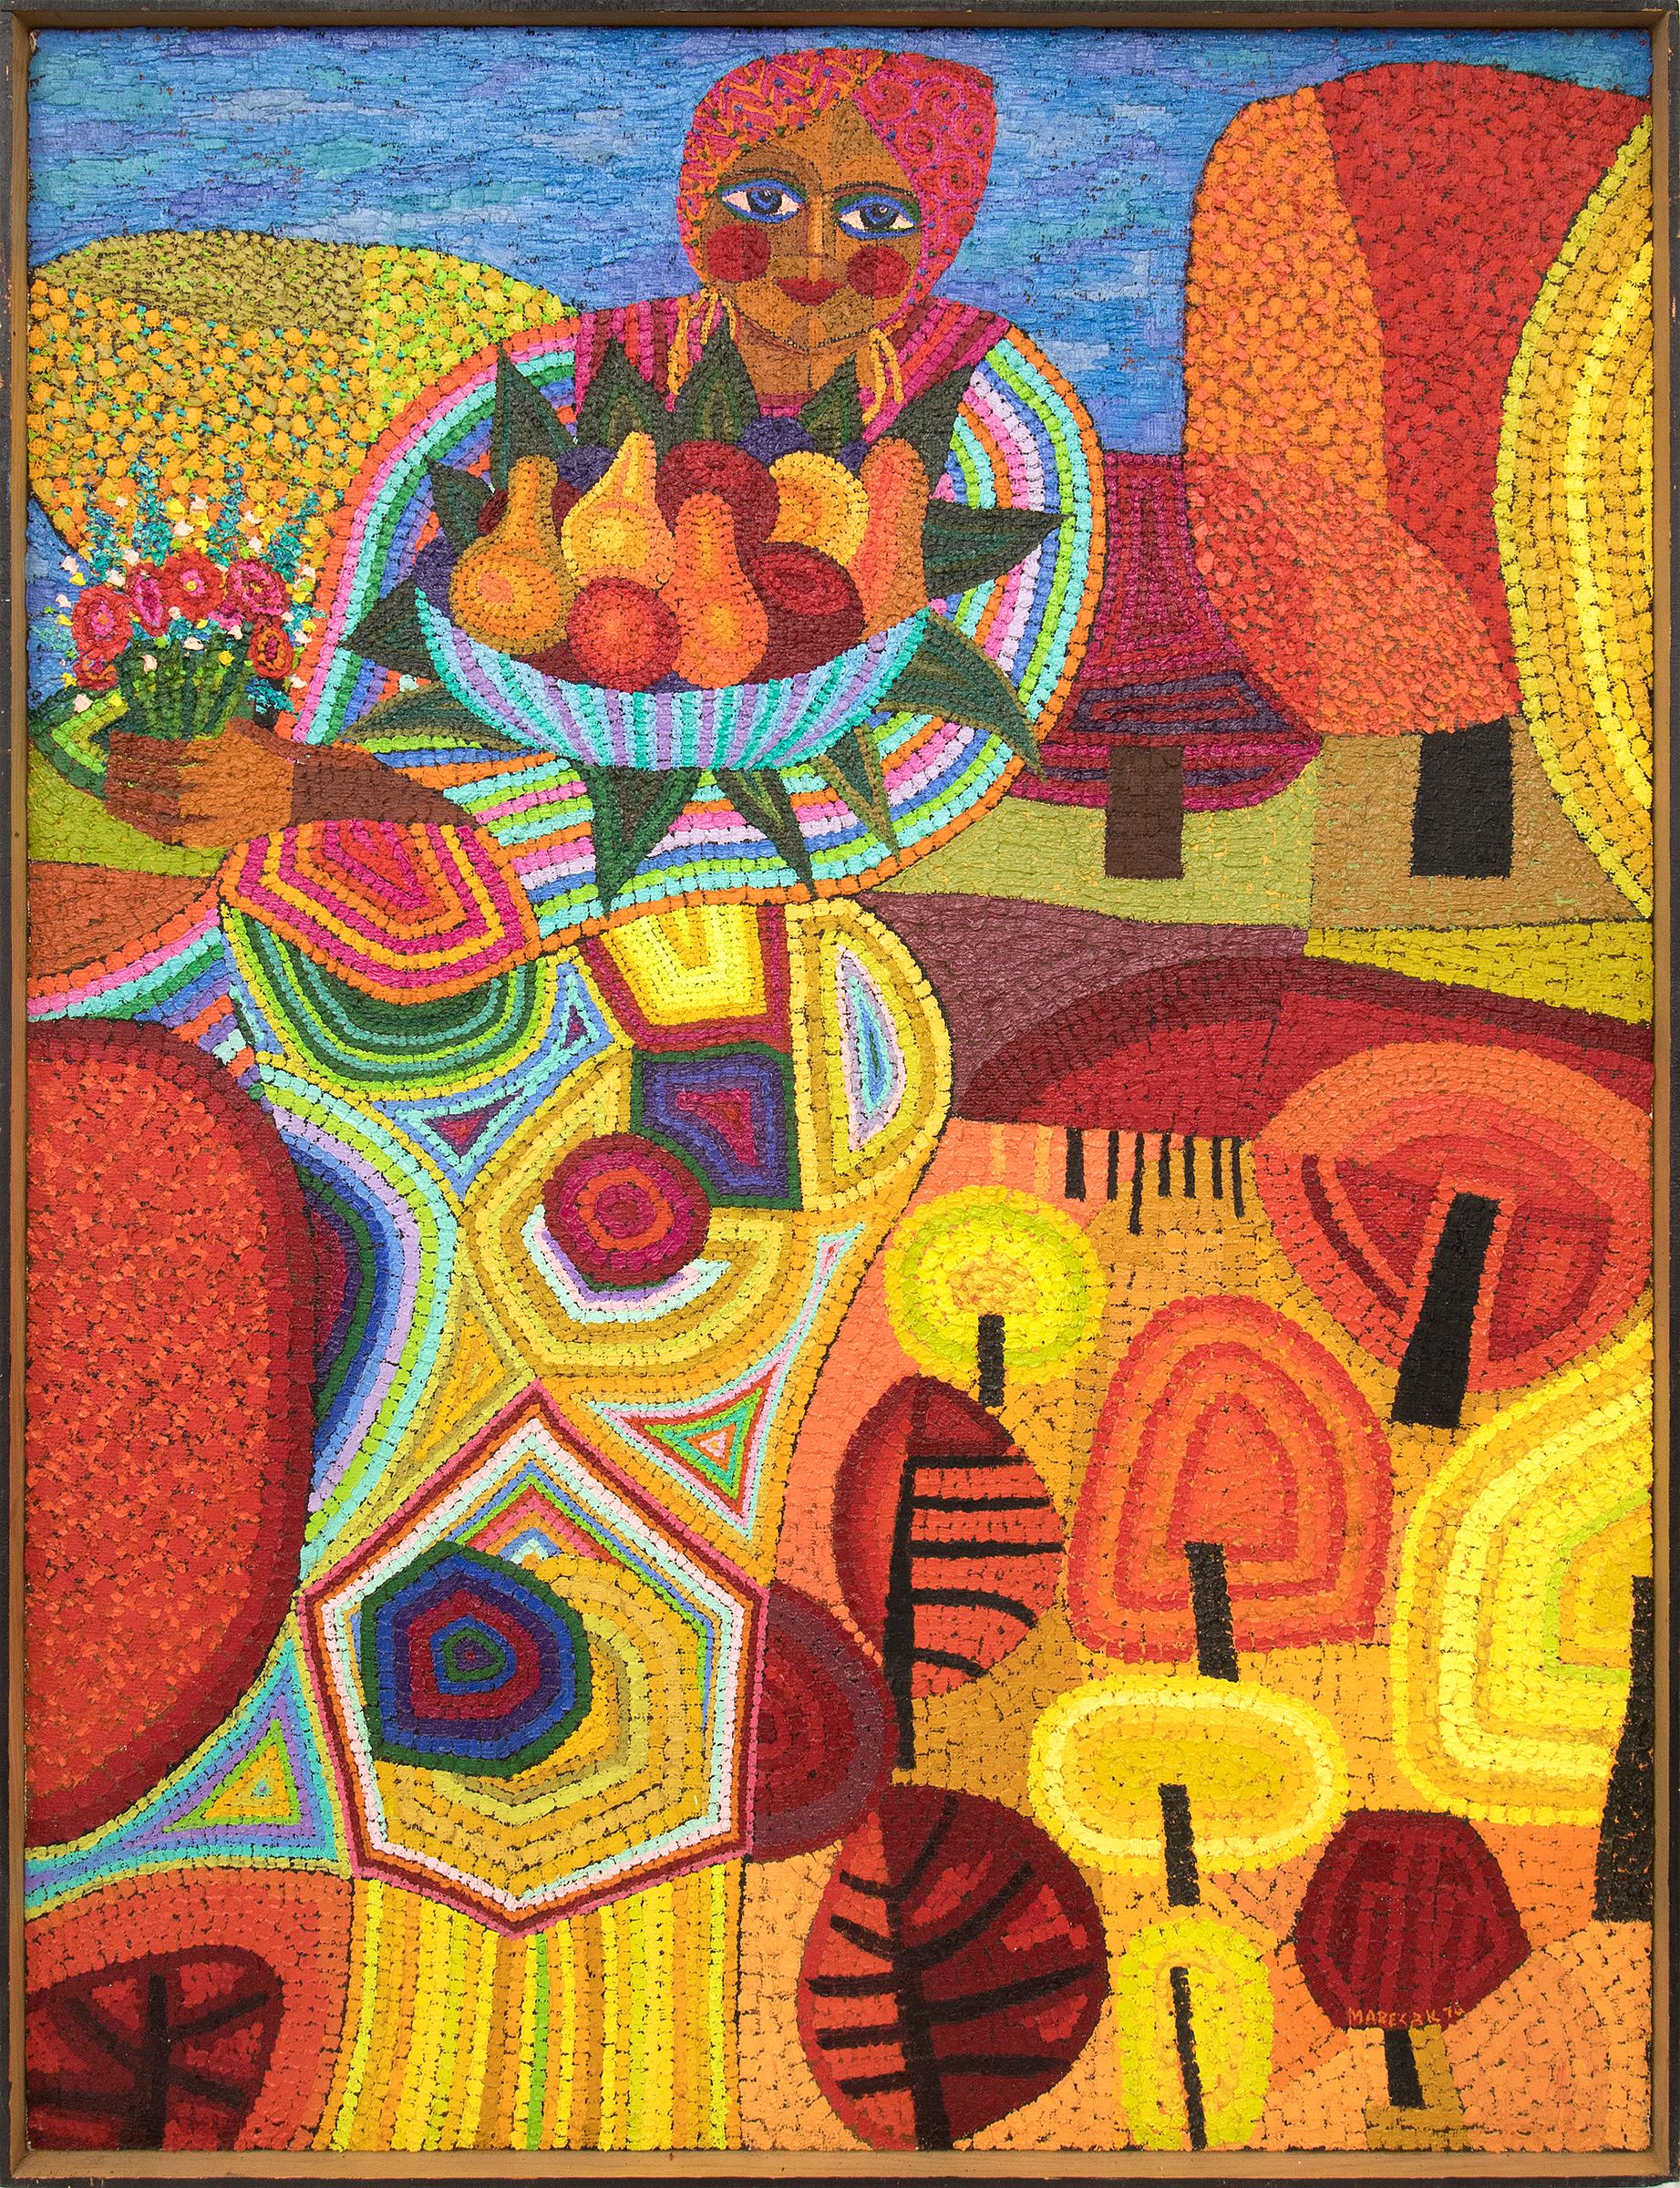 Demeter (Semi-Abstract Painting of woman holding fruit: Orange, Yellow, Blue)